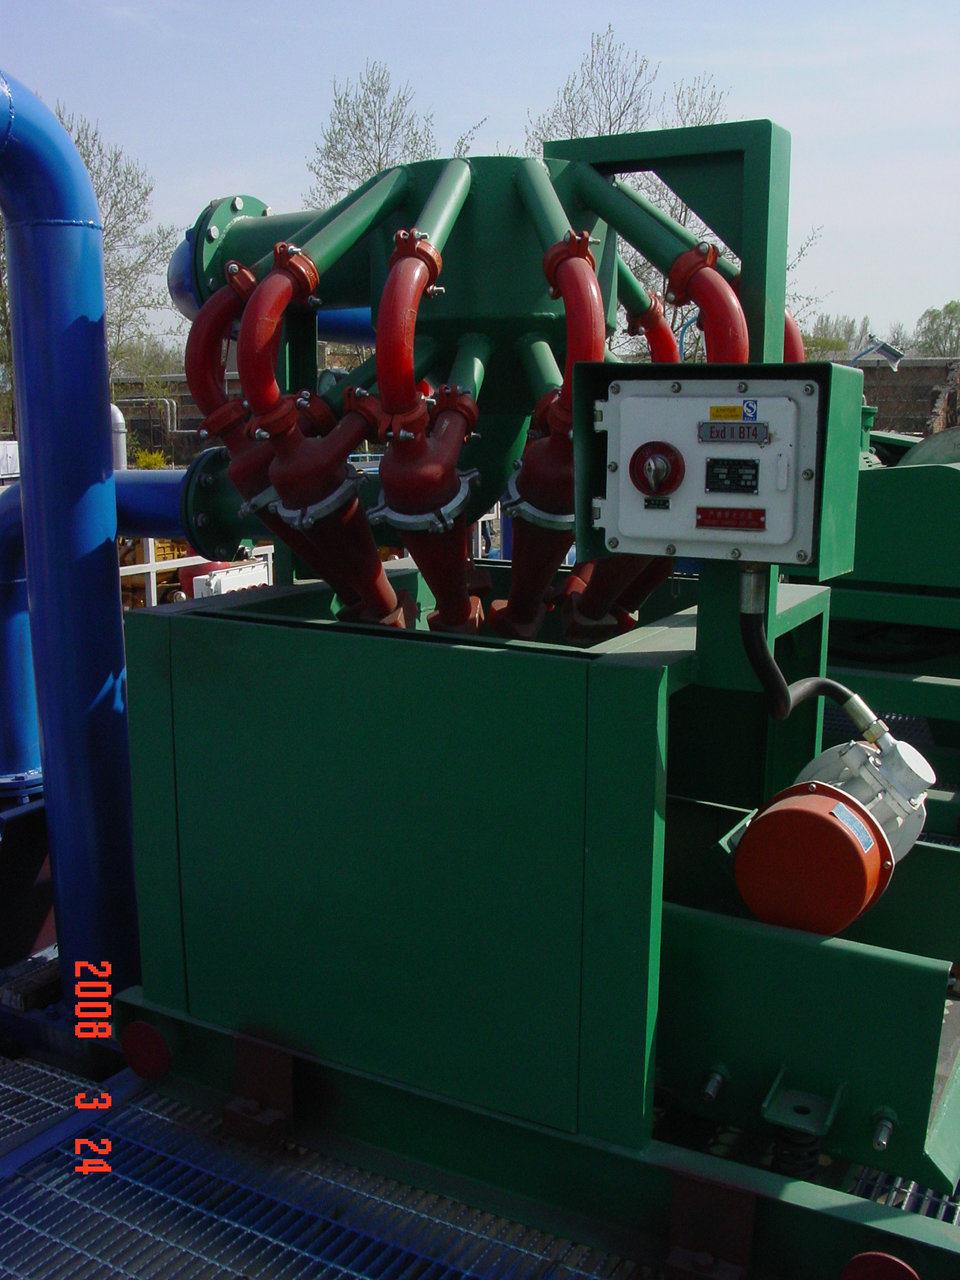 Mud Circulating System Mud Treatment Solider Control System Mixing Pump Mud Cleaning